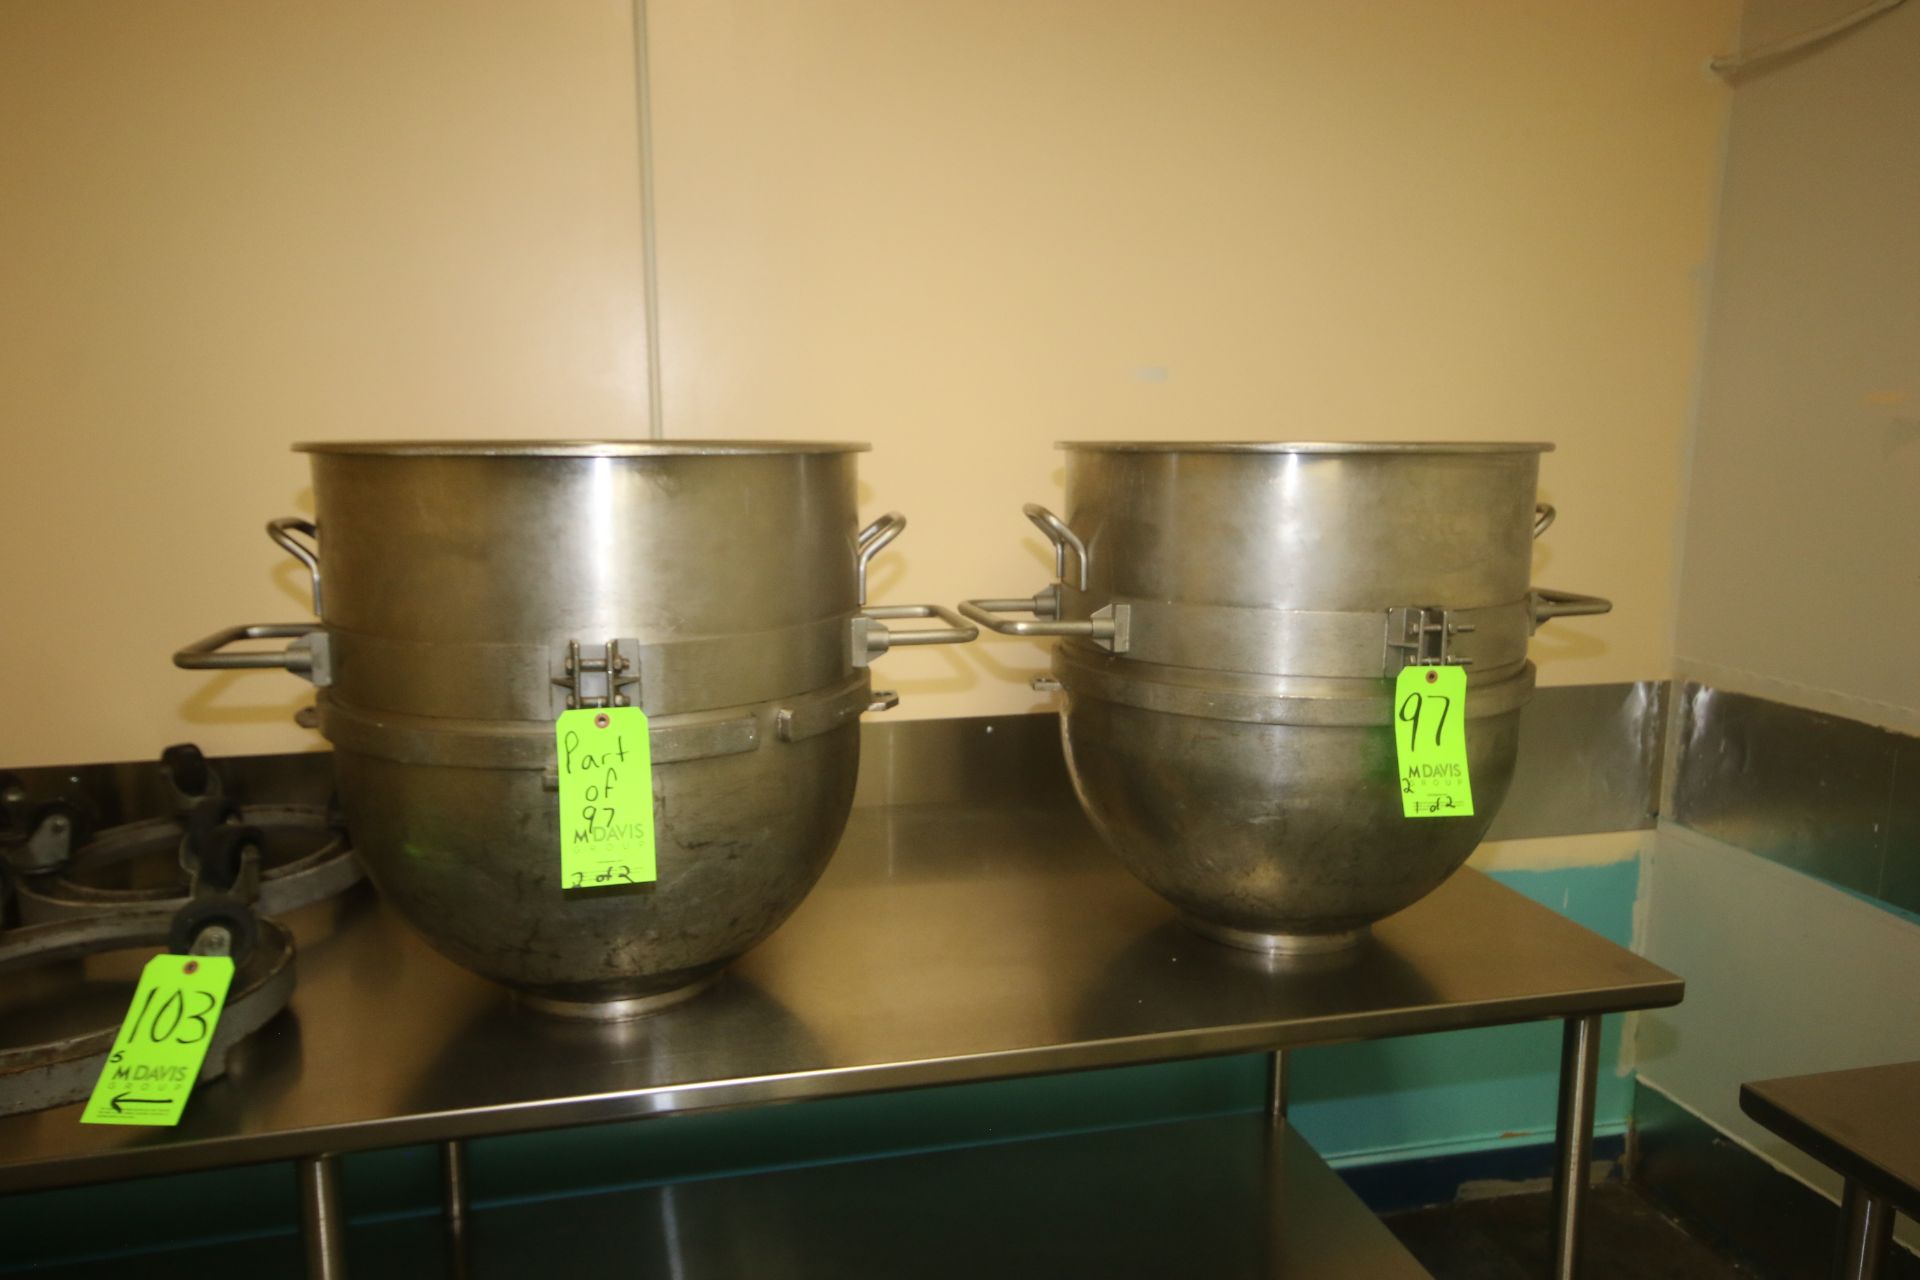 S/S Mixing Bowls, Internal Dims.: Aprox. 23" Dia. x 24" Deep, with Handles & Mixer Brackets (LOCATED